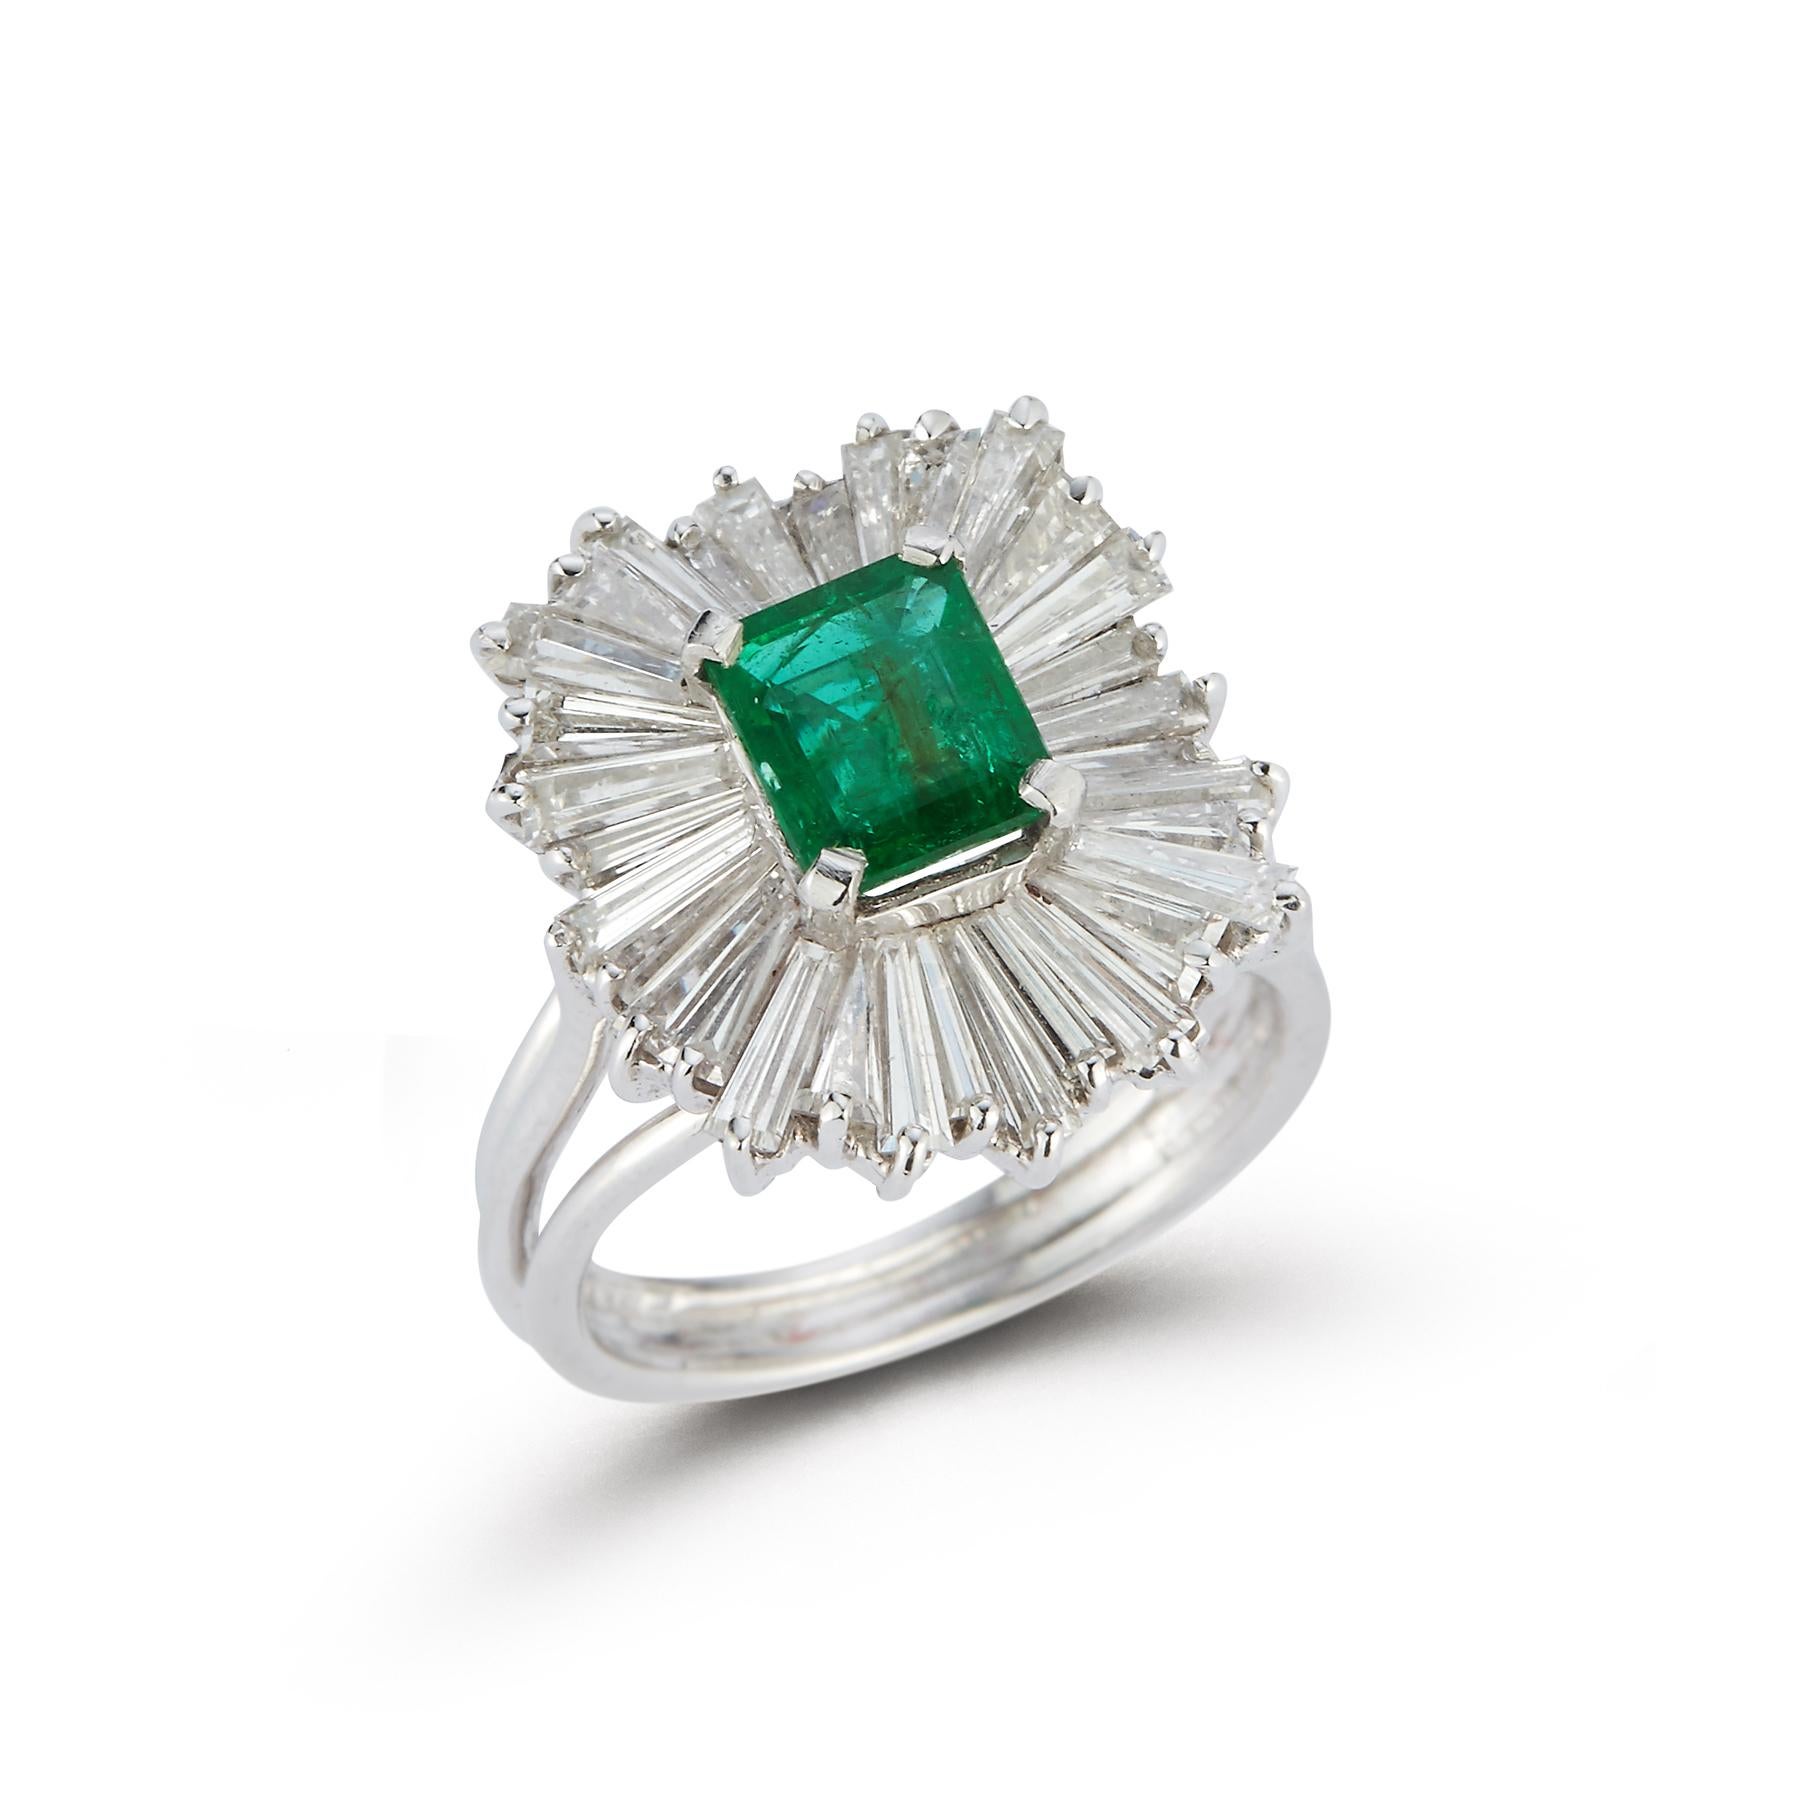 Emerald and Diamond Ballerina Cocktail Ring

Platinum Ring with Center Emerald approximately 1.30 Carats Surrounded by an Array of Baguette Cut Diamonds approximately 2.54 Carats

Ring Size 5.5

Resizable Free of Charge
